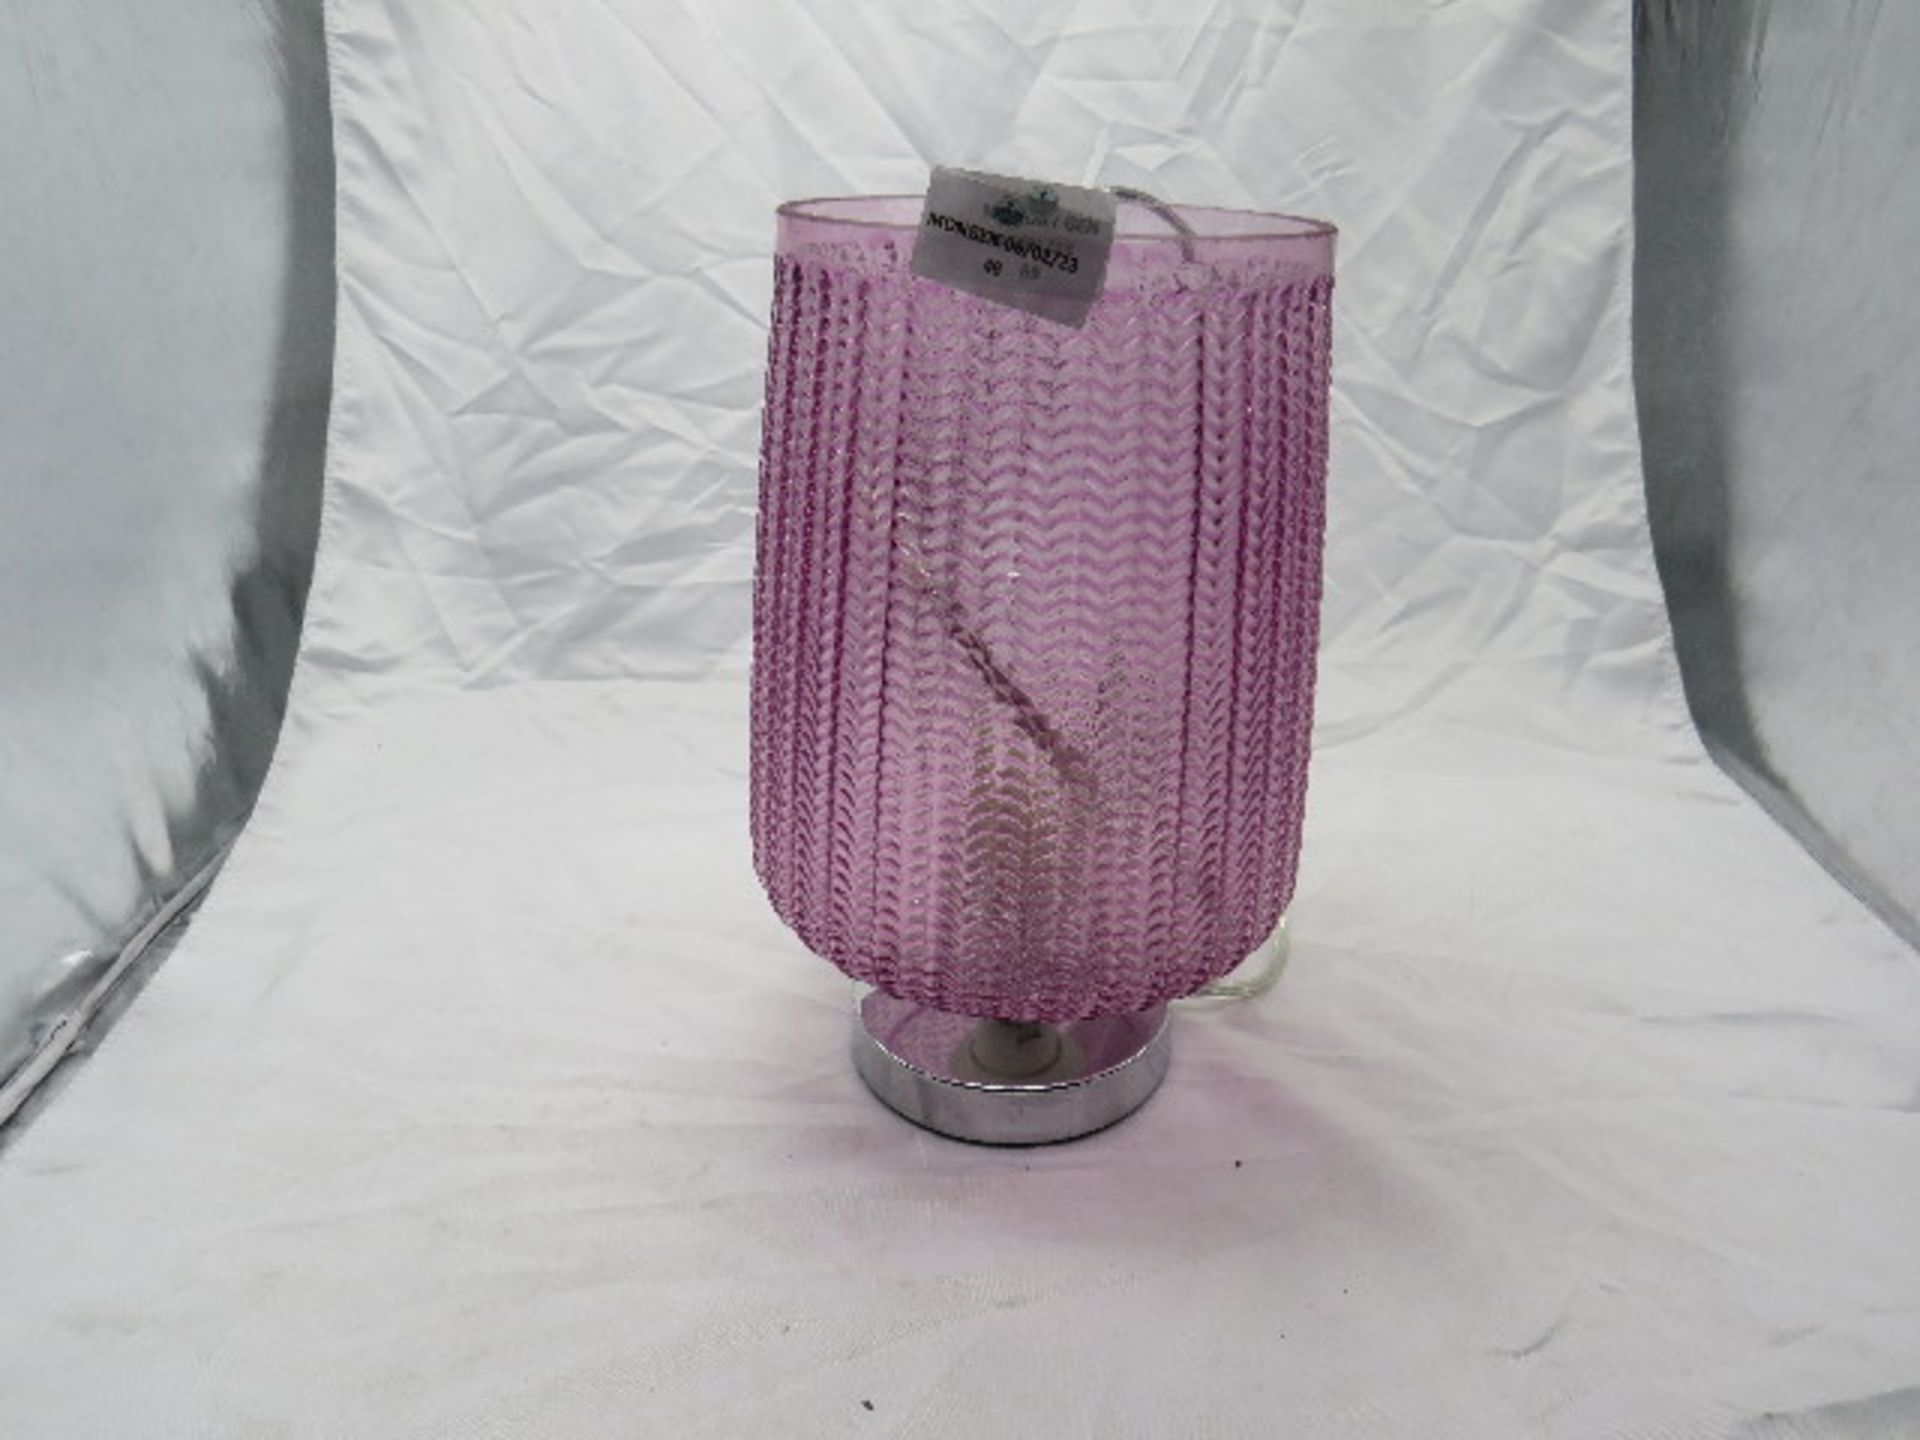 Table Lamp - Purple Glass Shade - No Packaging, May Contain Marks Or Unseen Damages.